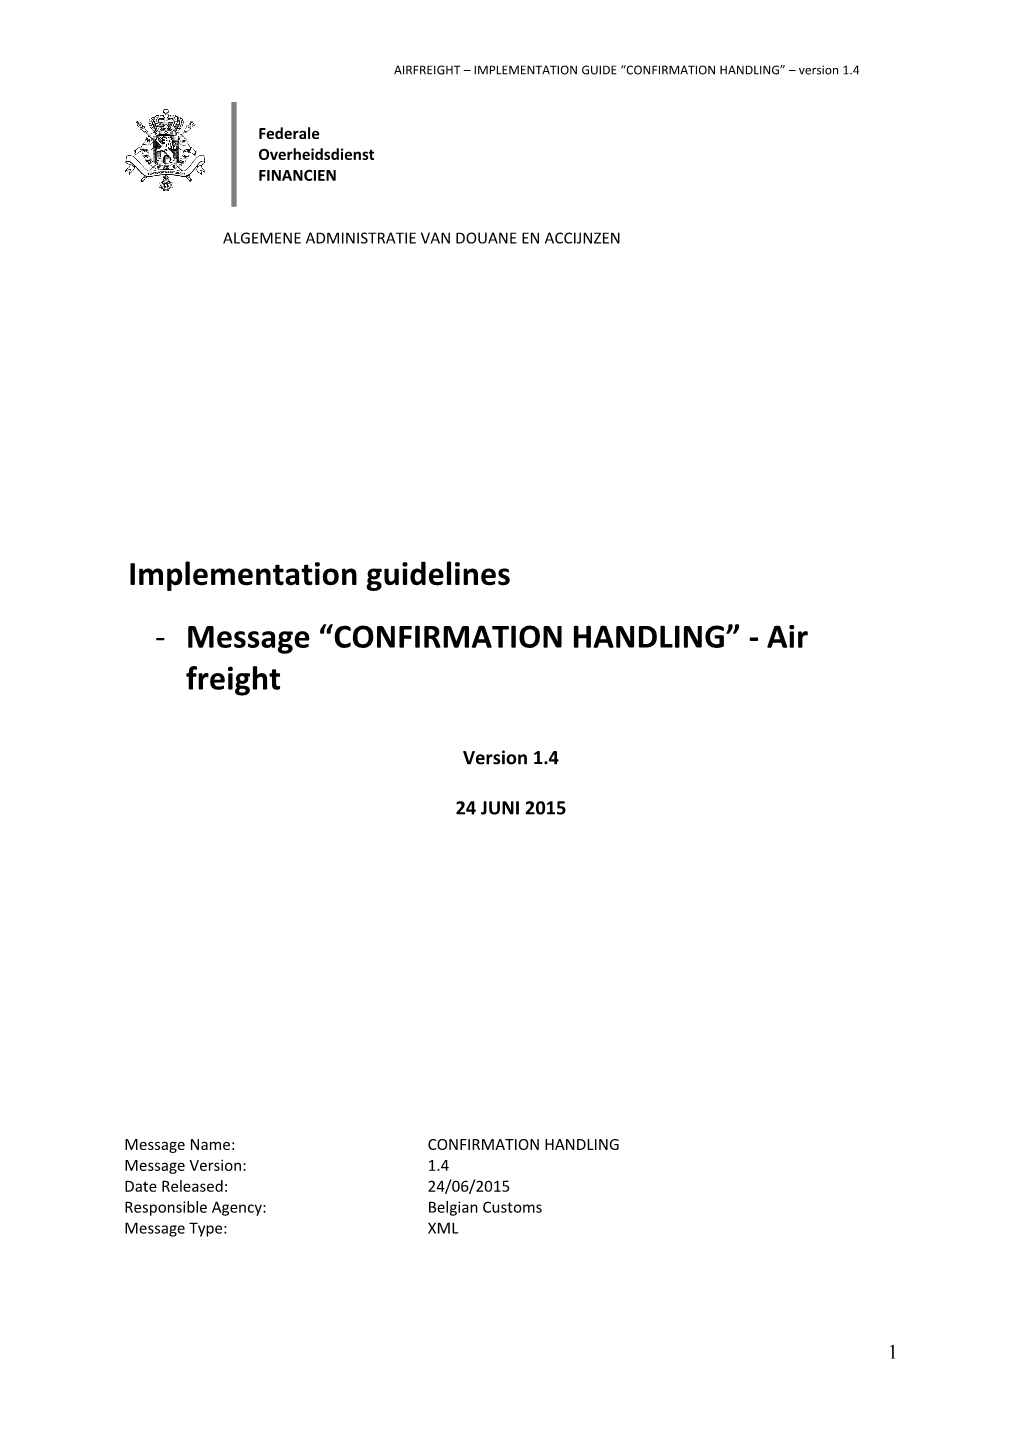 AIRFREIGHT IMPLEMENTATION GUIDE CONFIRMATION HANDLING Version 1.4